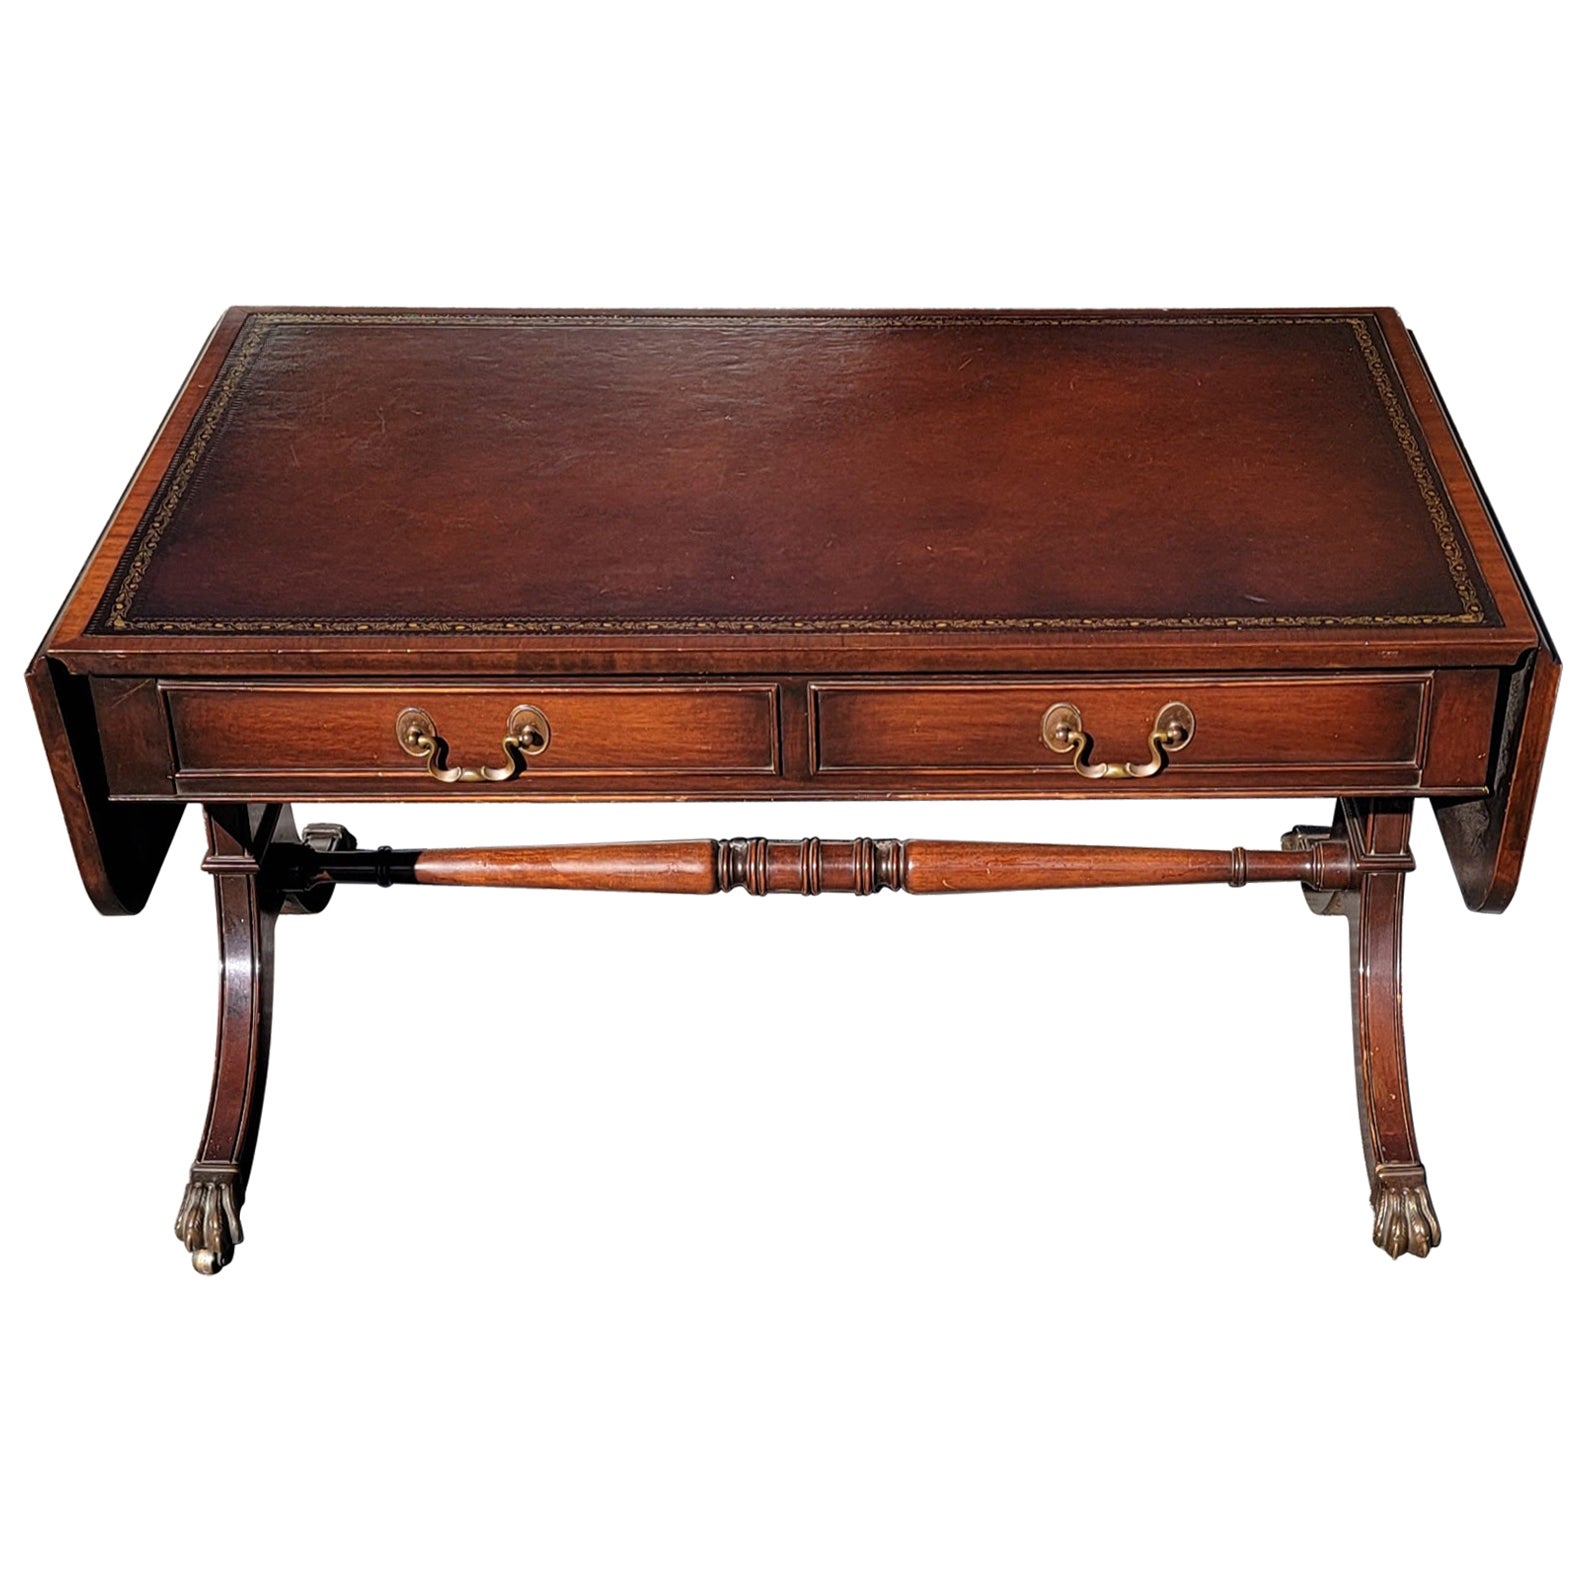 George III Style Mahogany and Leather Top Inset Drop Leaf Coffee Table on Wheels